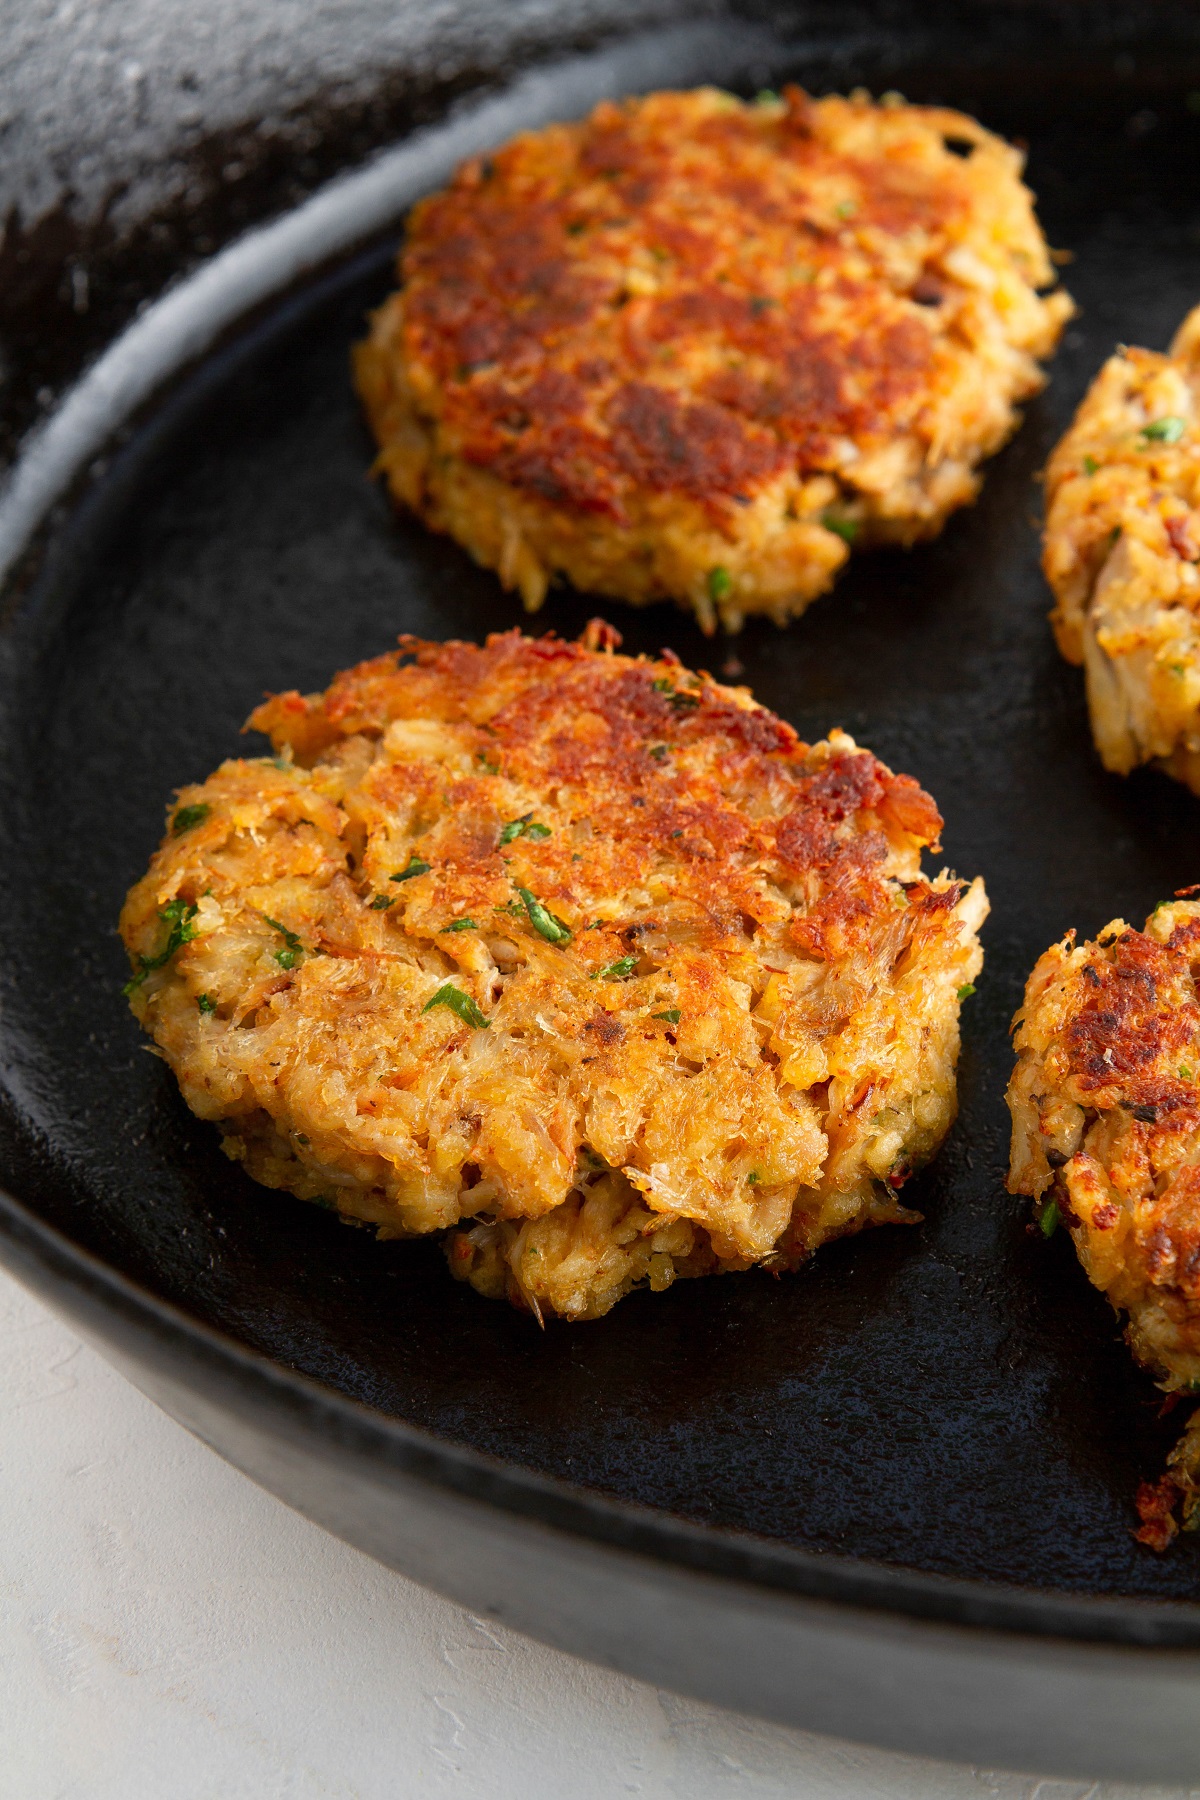 Crab cakes cooking in a cast iron skillet to golden brown perfection.